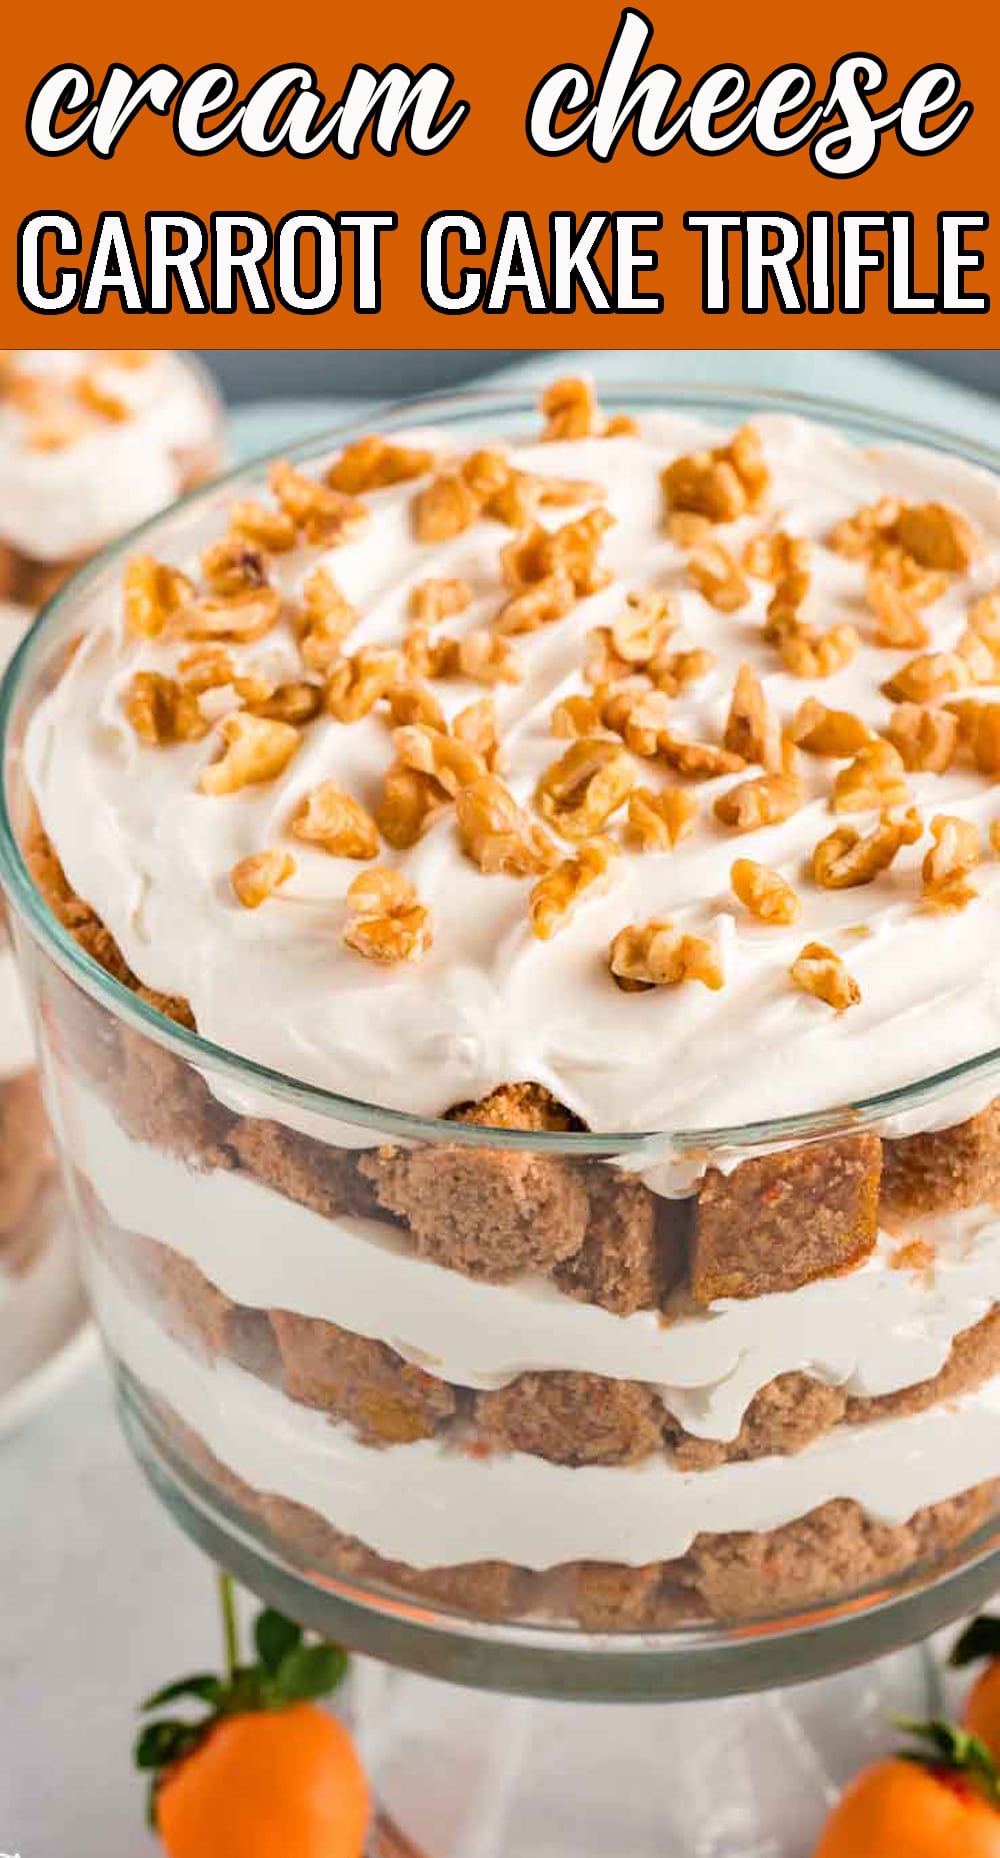 Cream Cheese Carrot Cake Trifle: Spruce up a carrot cake mix by layering it with walnuts and a homemade cream cheese mixture. It makes a gorgeous, layered dessert! via @tastesoflizzyt